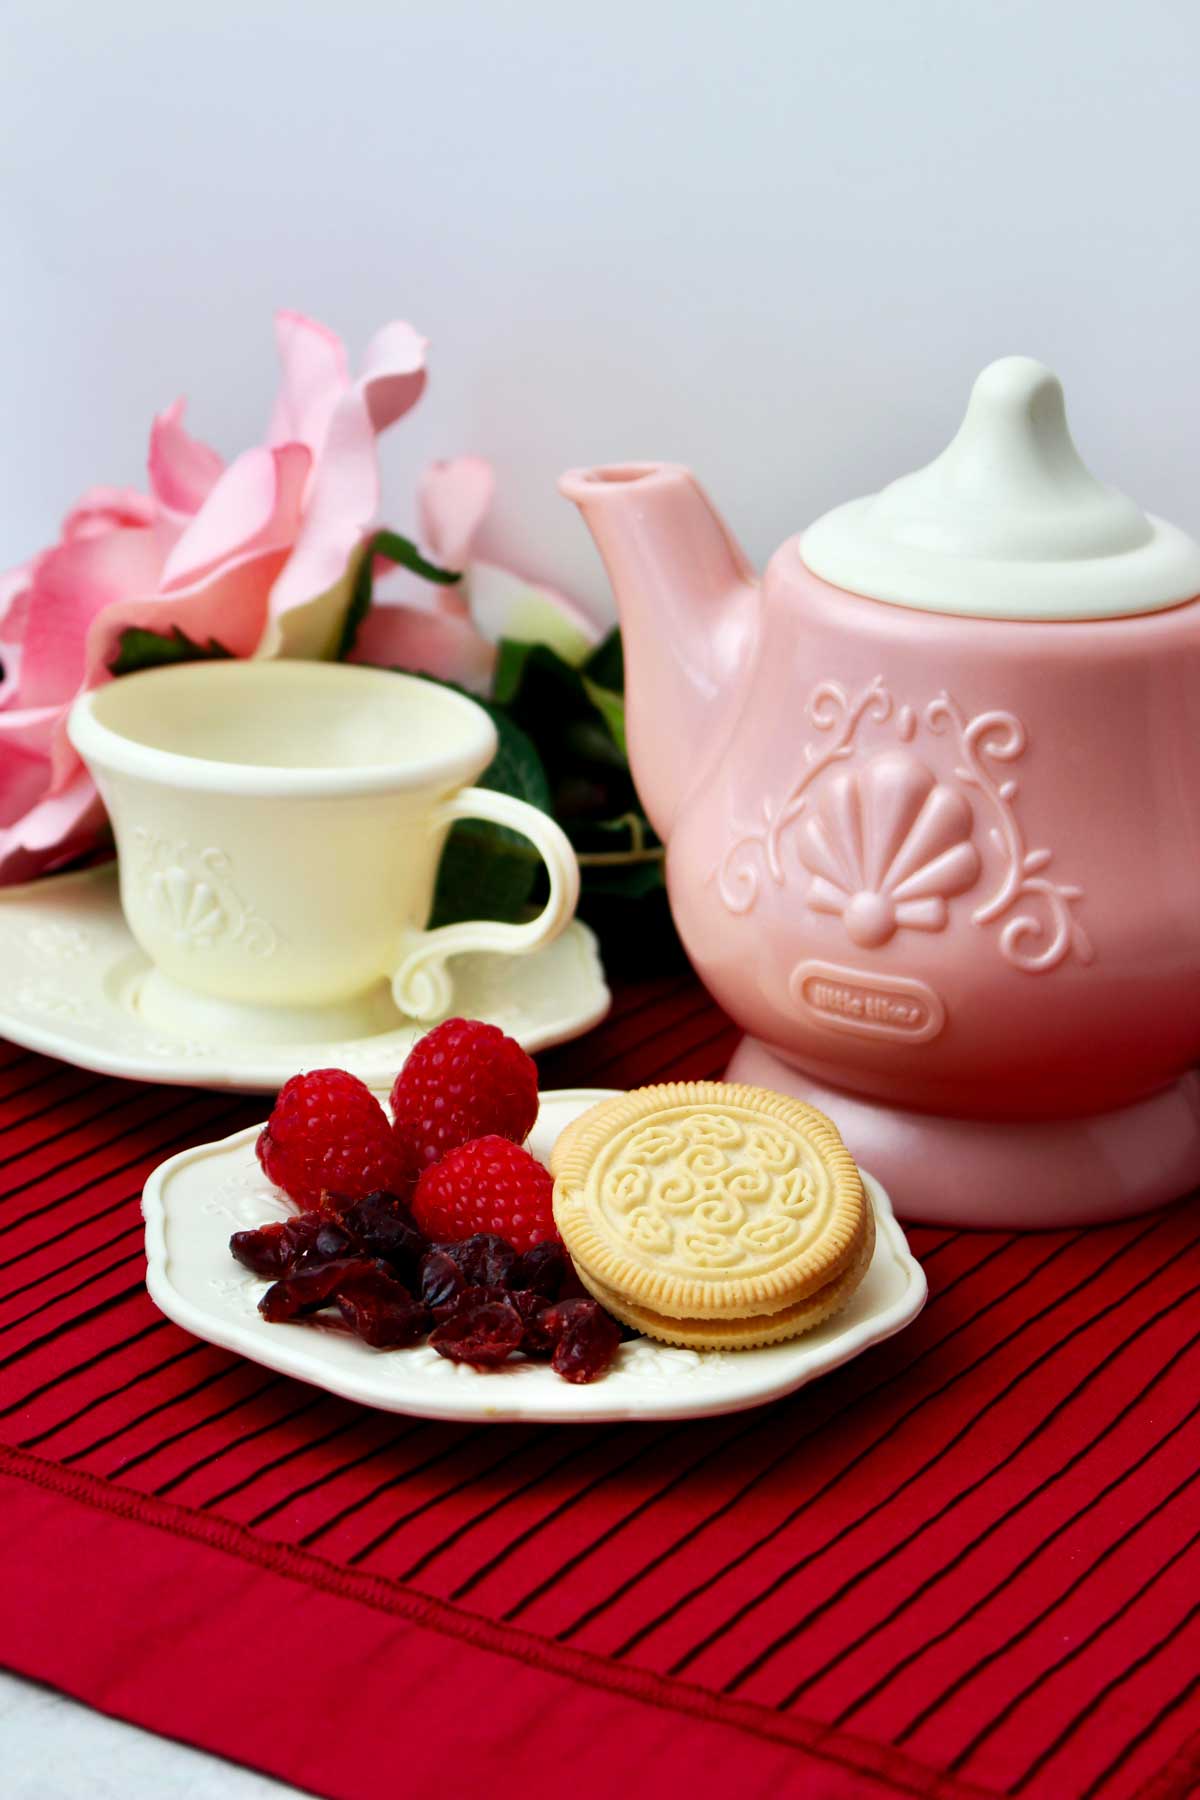 A pink and white tea set with flowers, cookies, berries and treats.